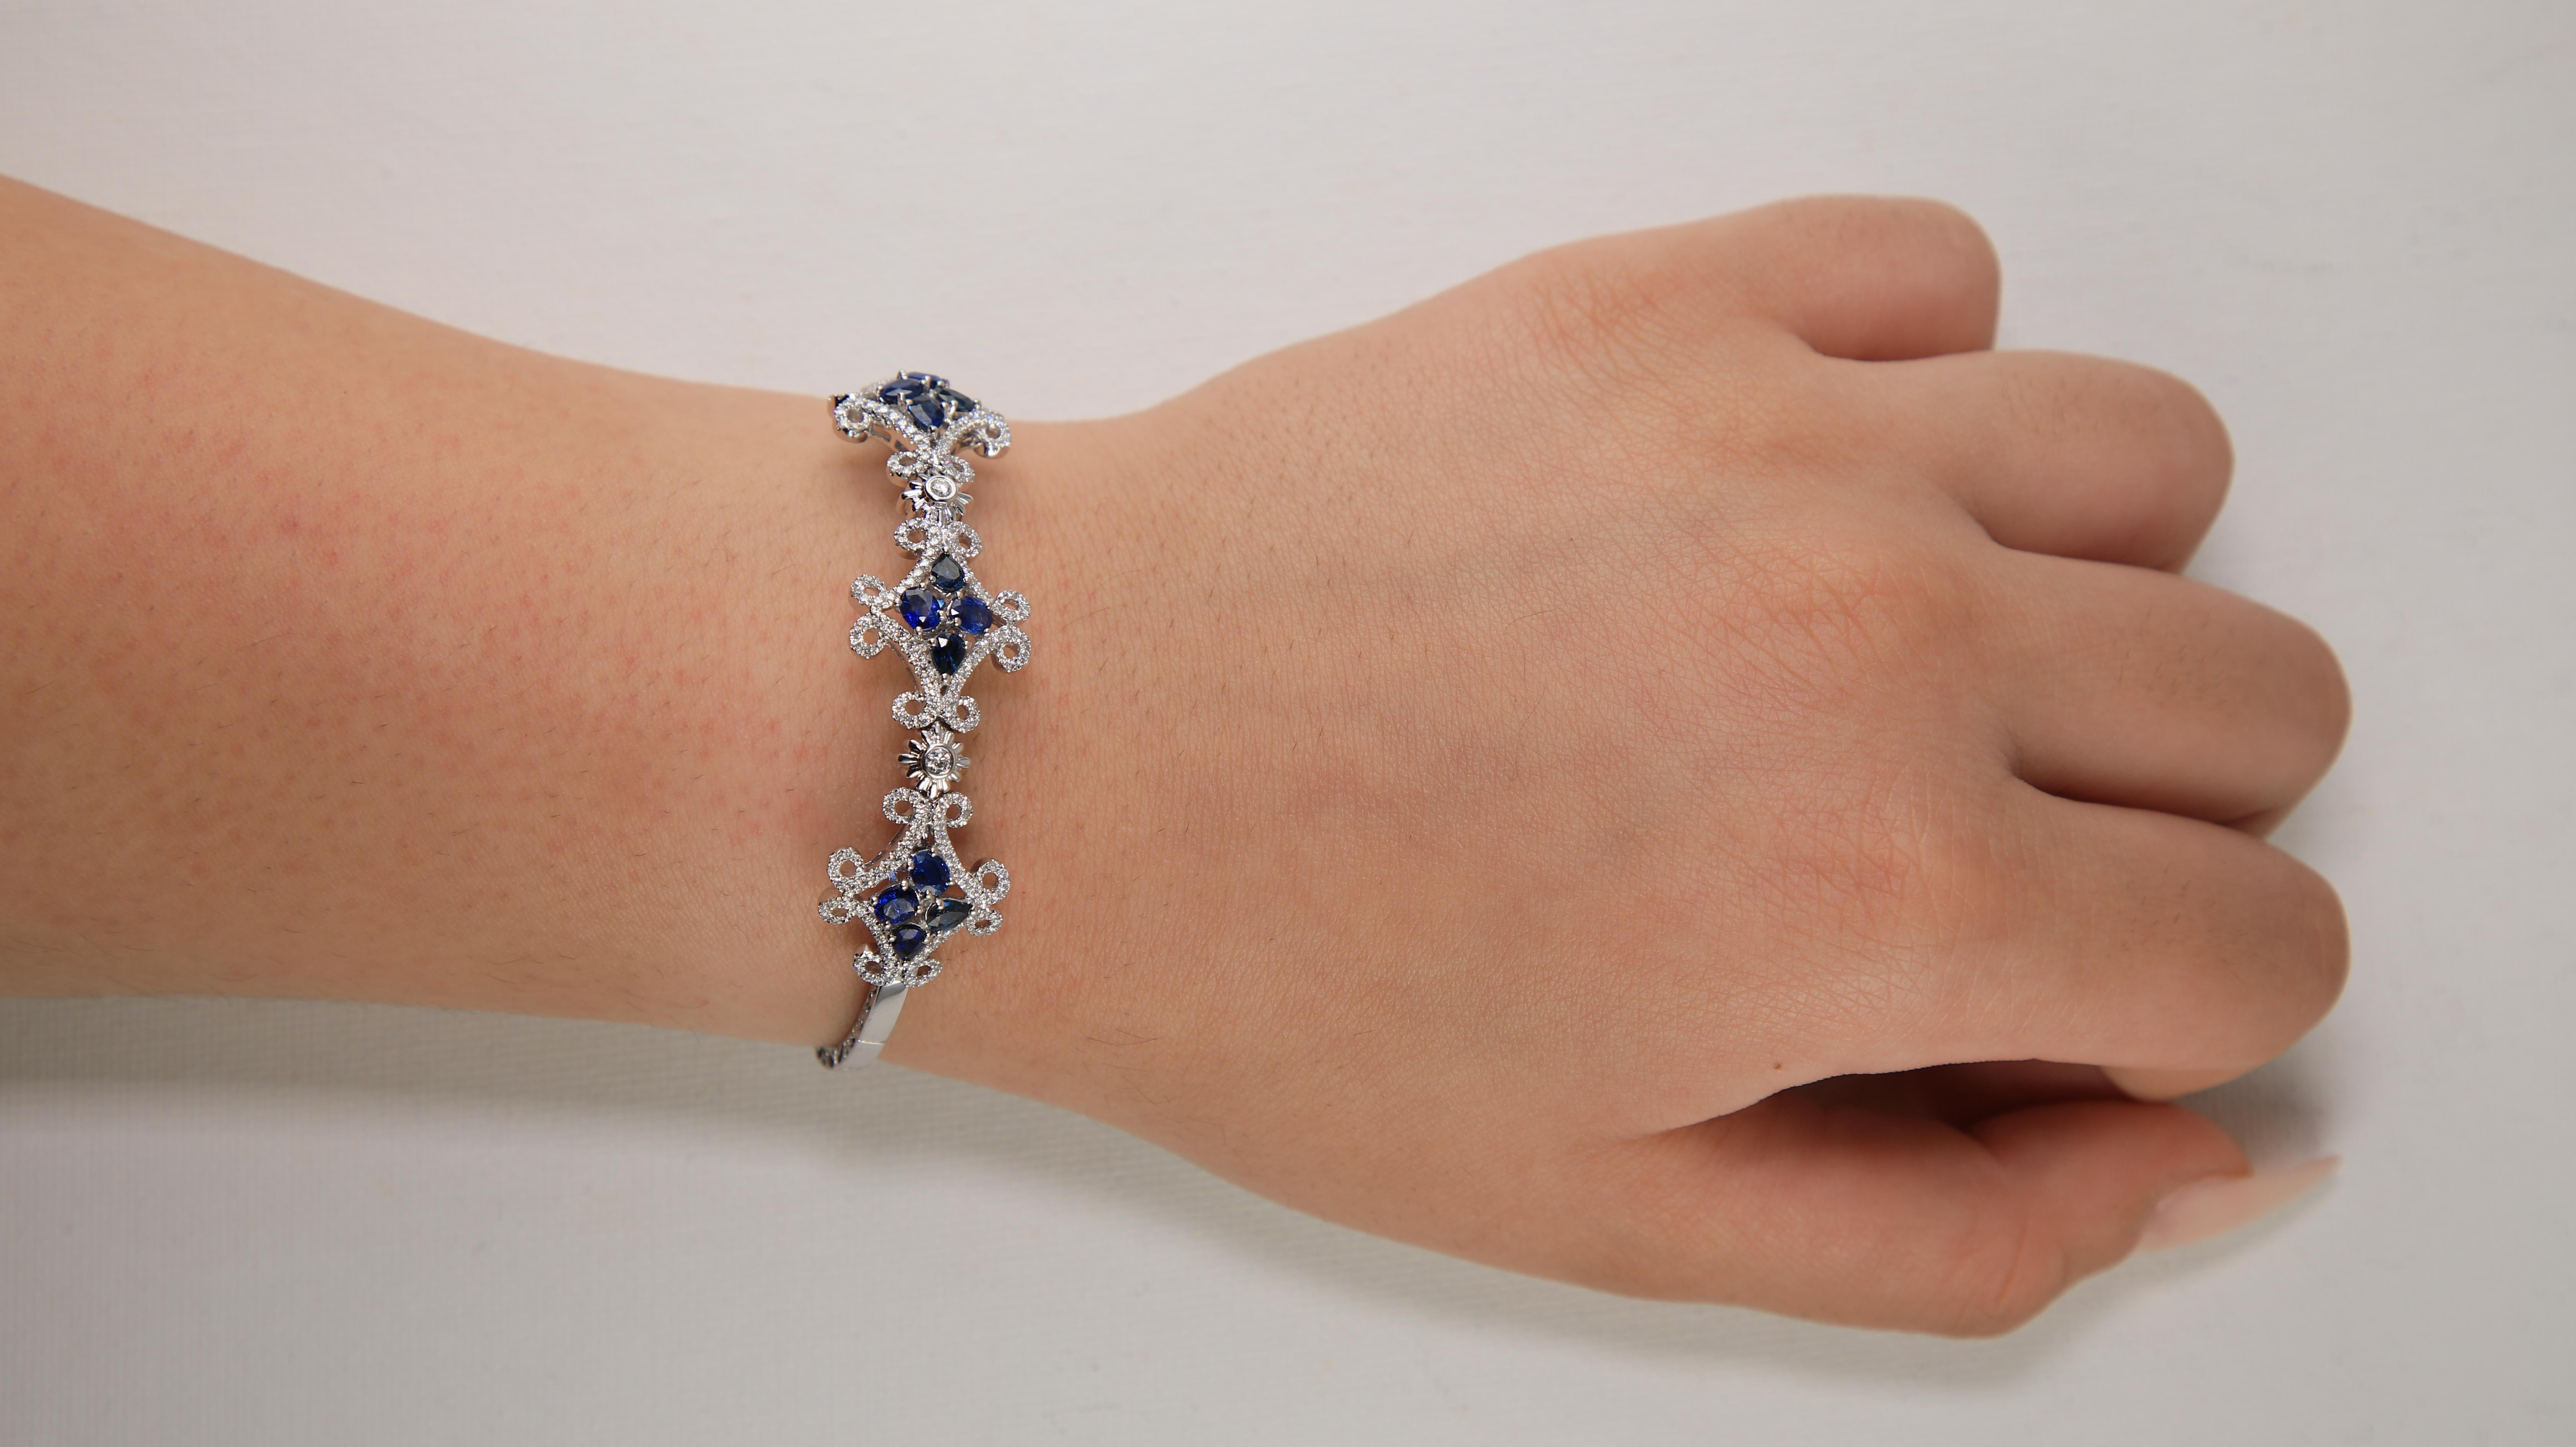 18 Karat White Gold Diamond and Sapphire Cuff Bangle Bracelet
Timeless detail and design! A well decorated Sapphire cuff bracelet with a flexible18k white gold structure. Set within the fine motifs are oval and pear shape sapphires, totaling to 2.31